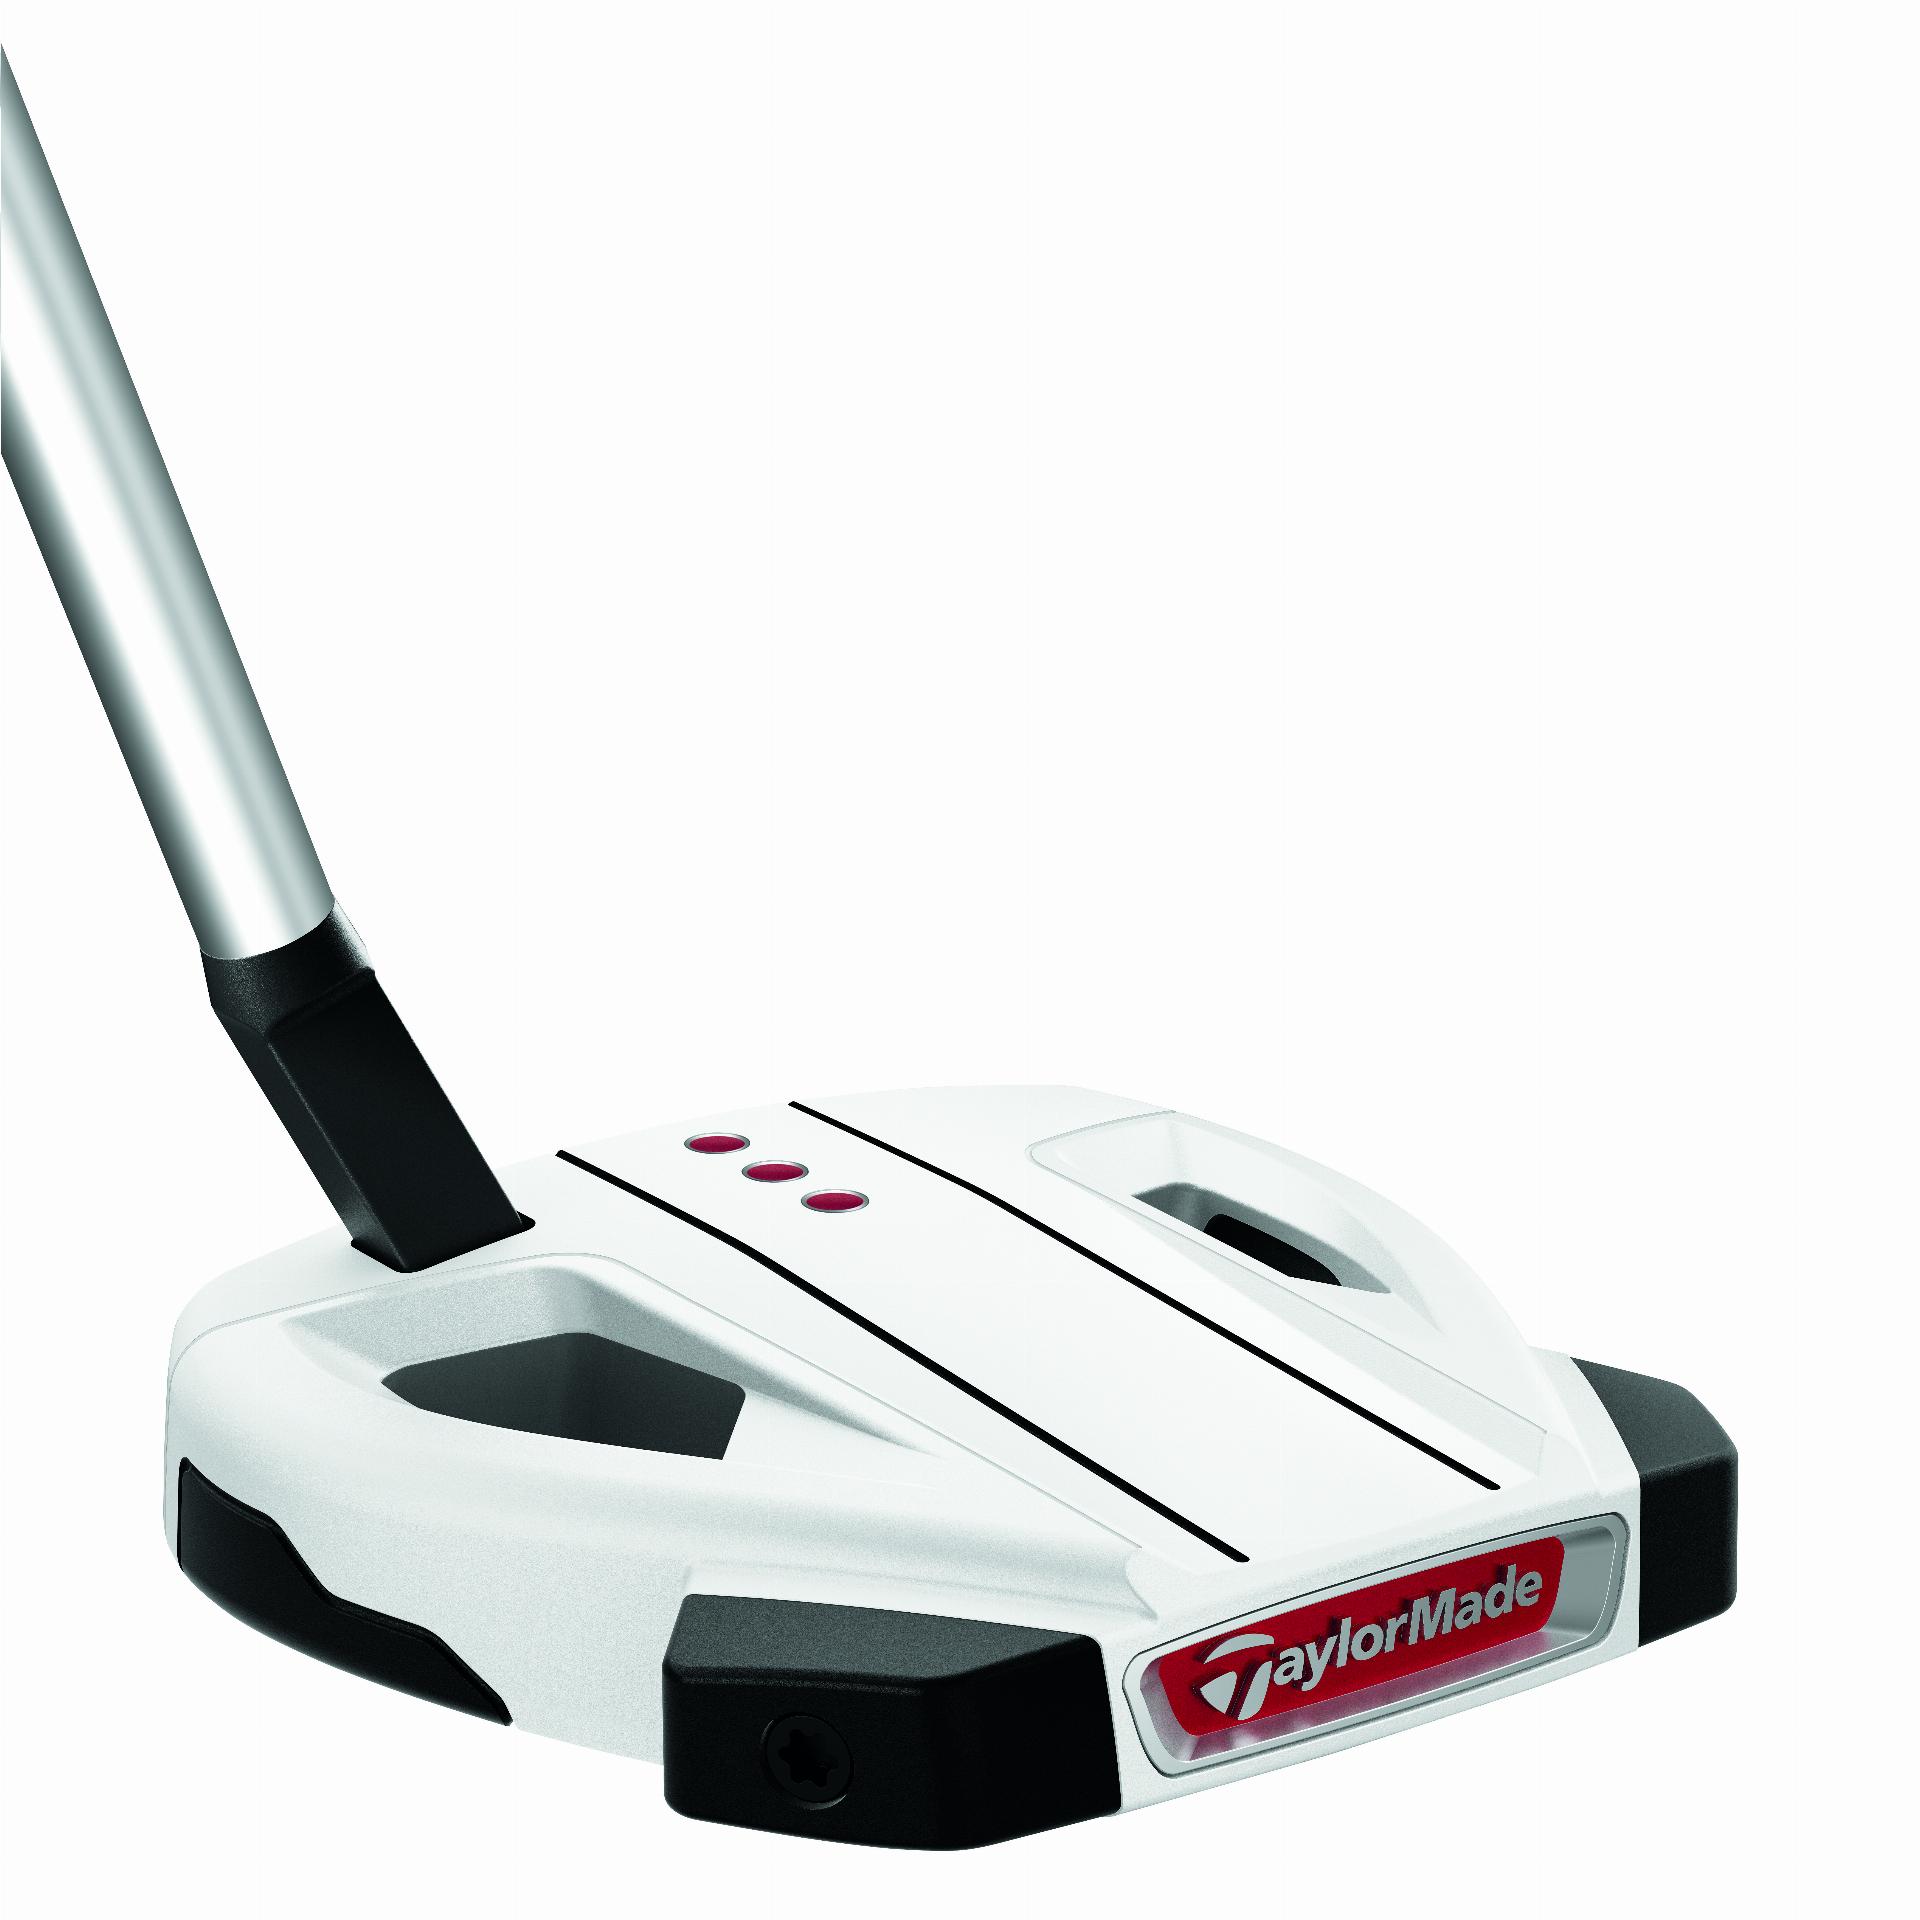 Taylormade - Putter - Spider EX ghost white